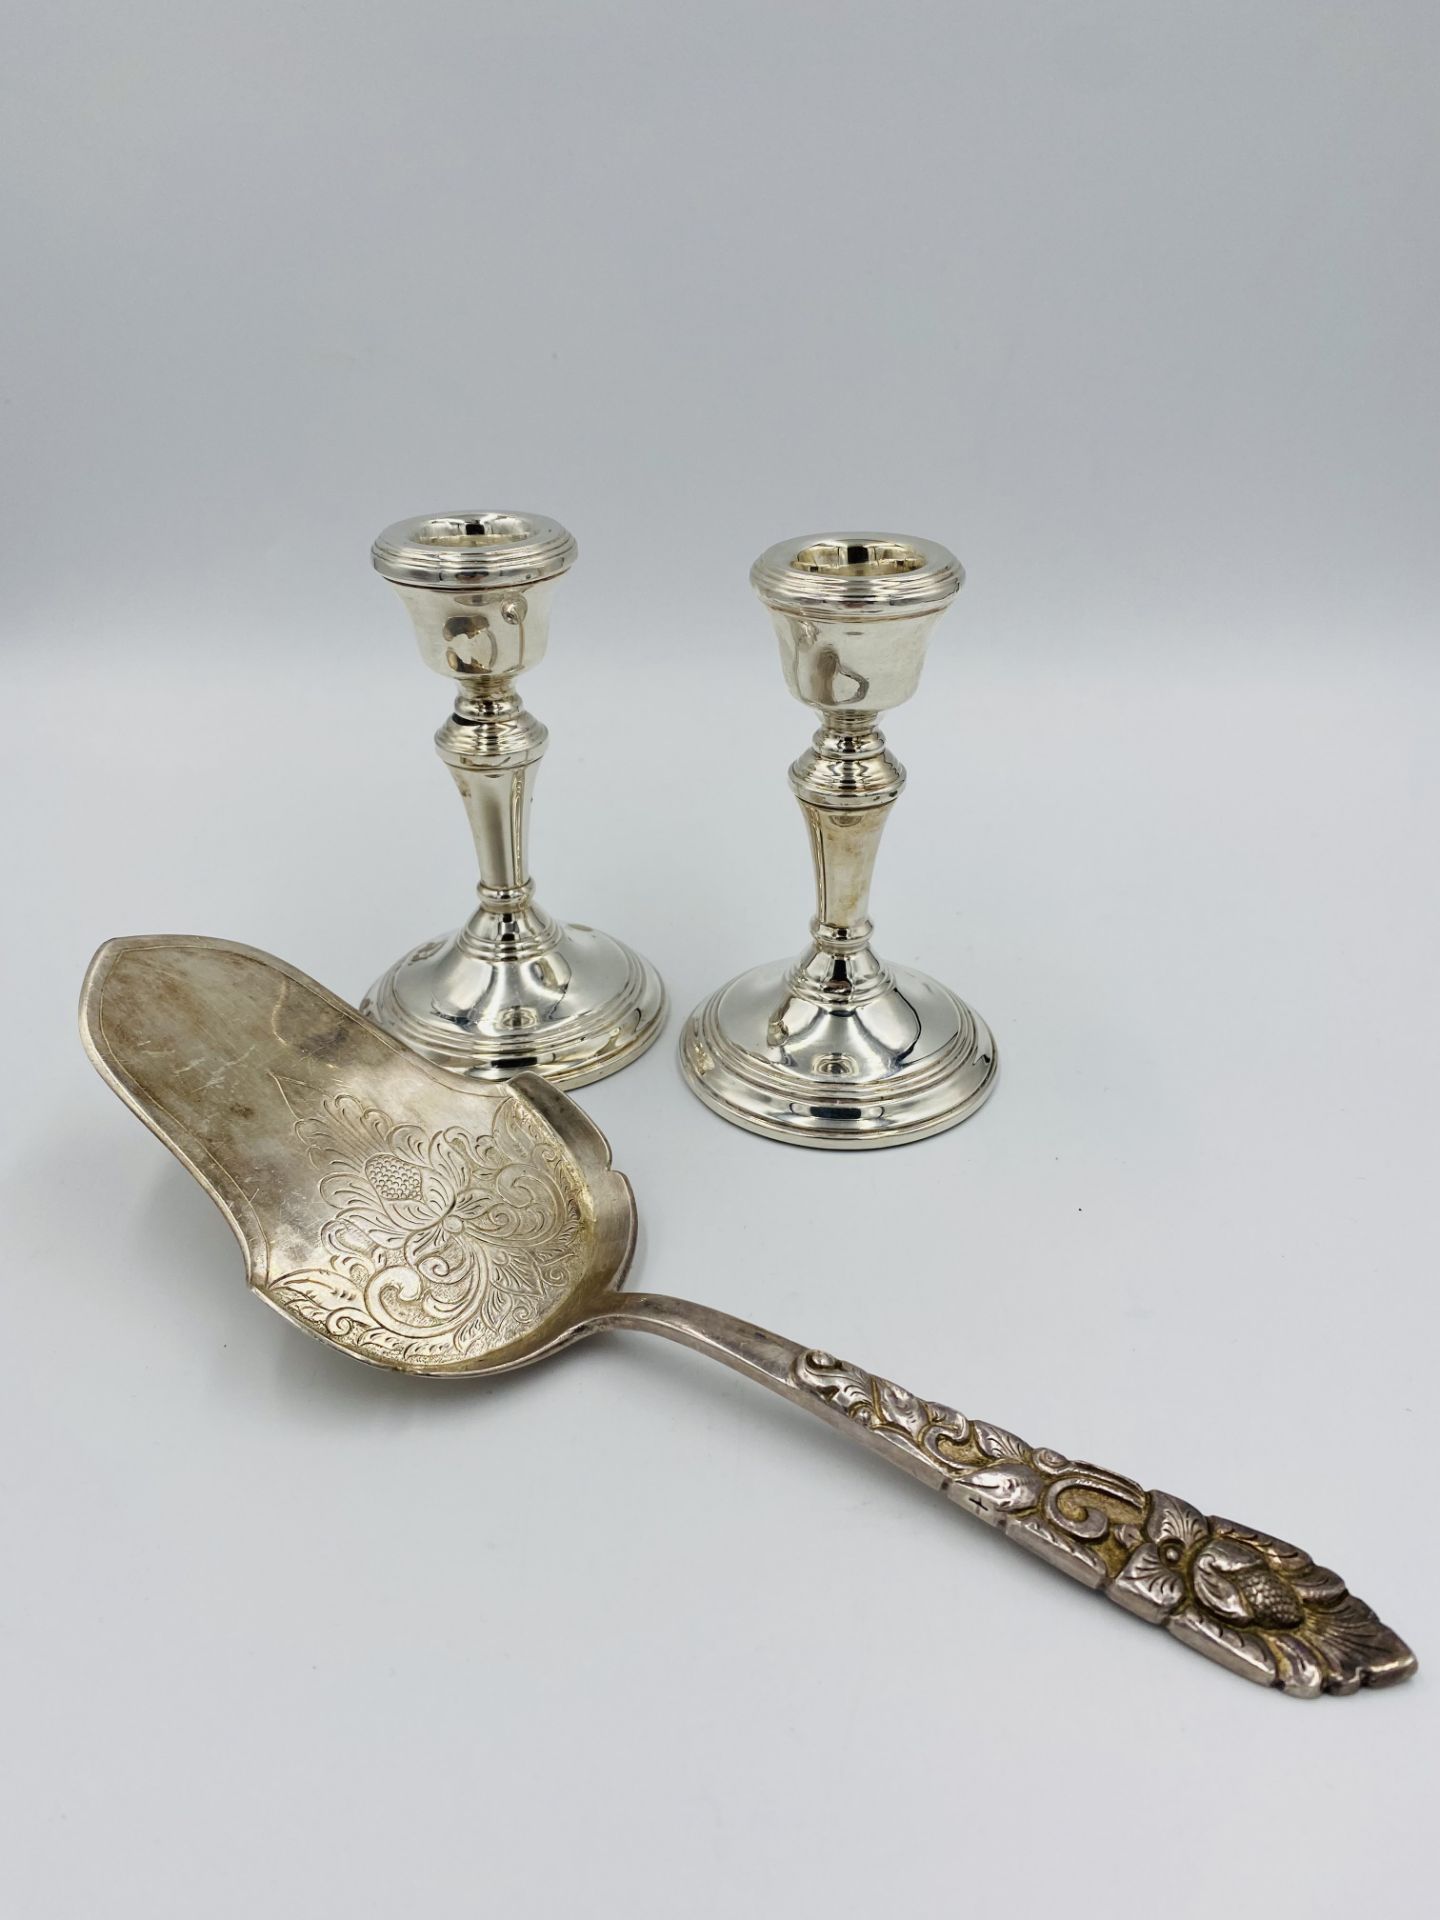 Pair of silver candlesticks together with a silver server - Image 3 of 3